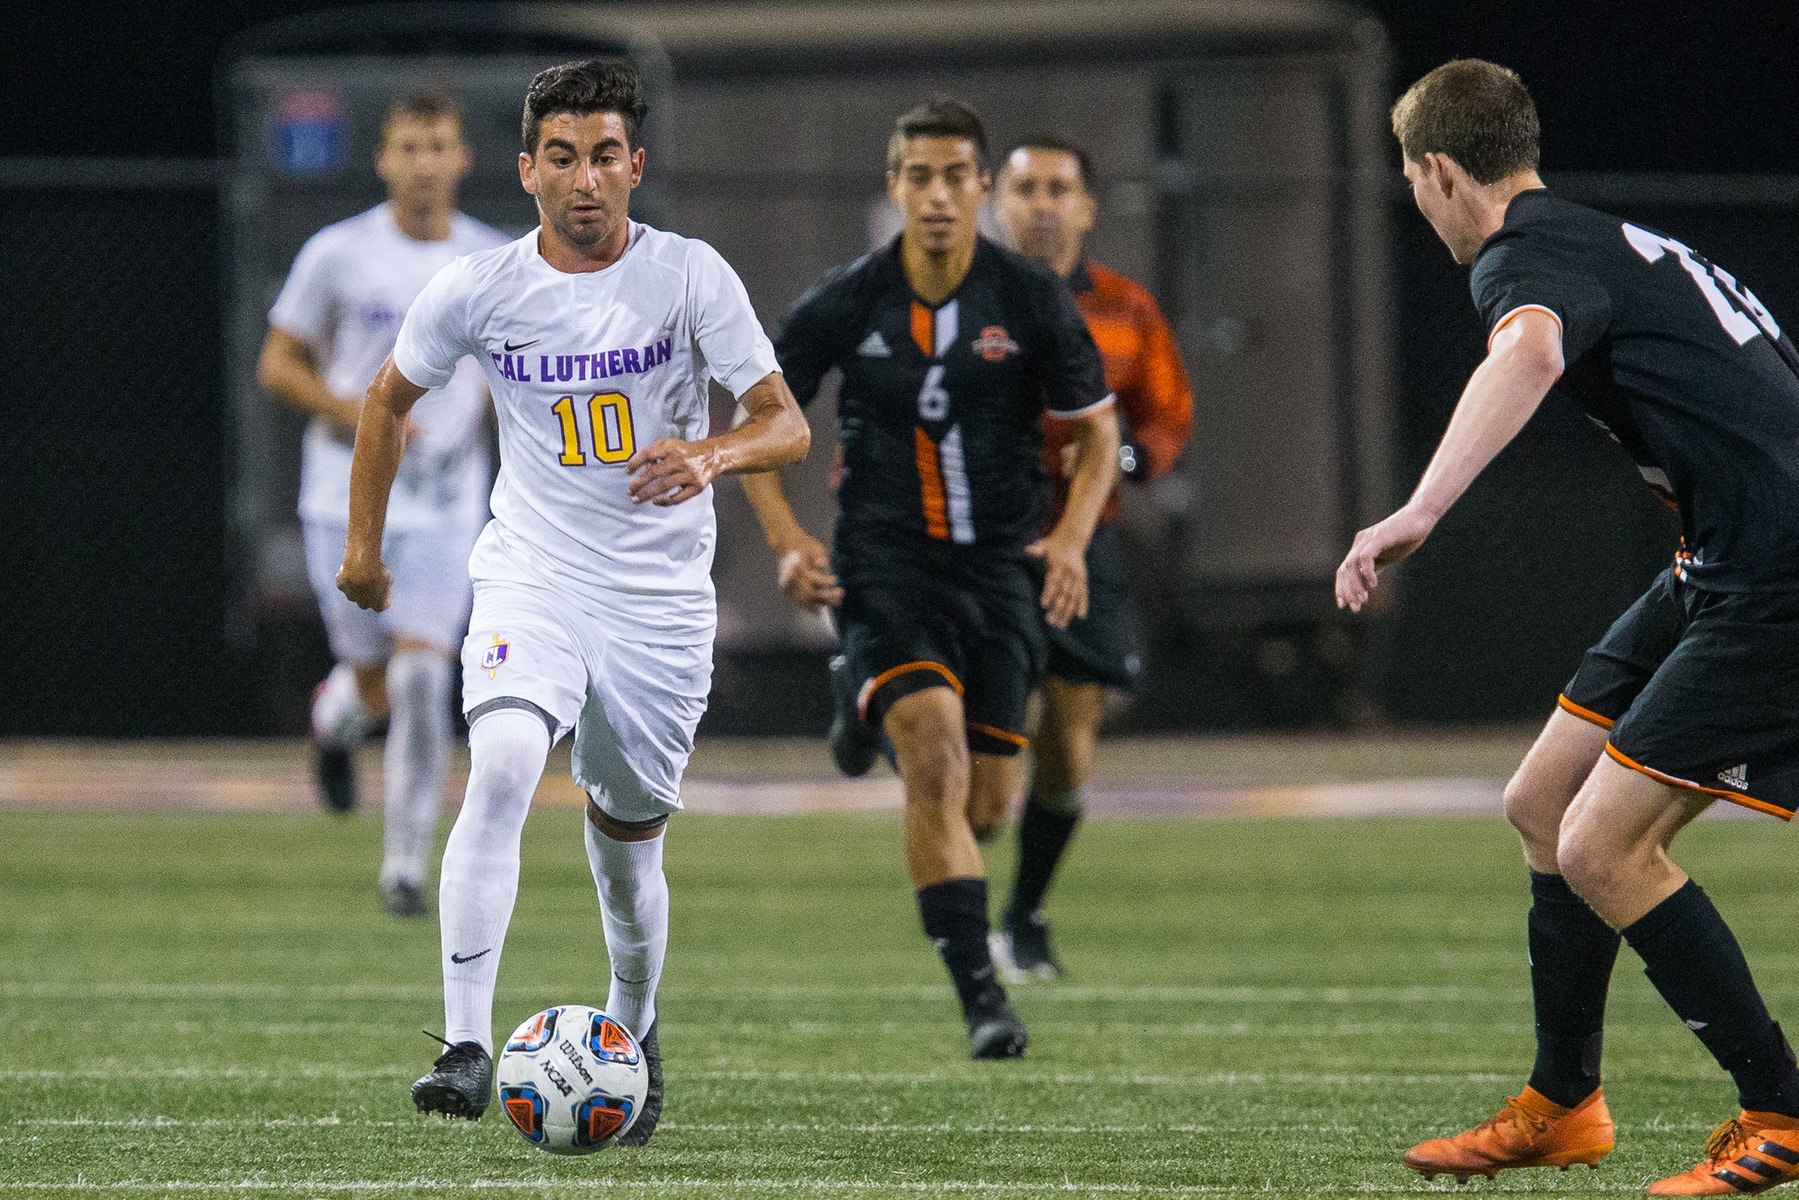 Kingsmen Fall to No. 24 Stags